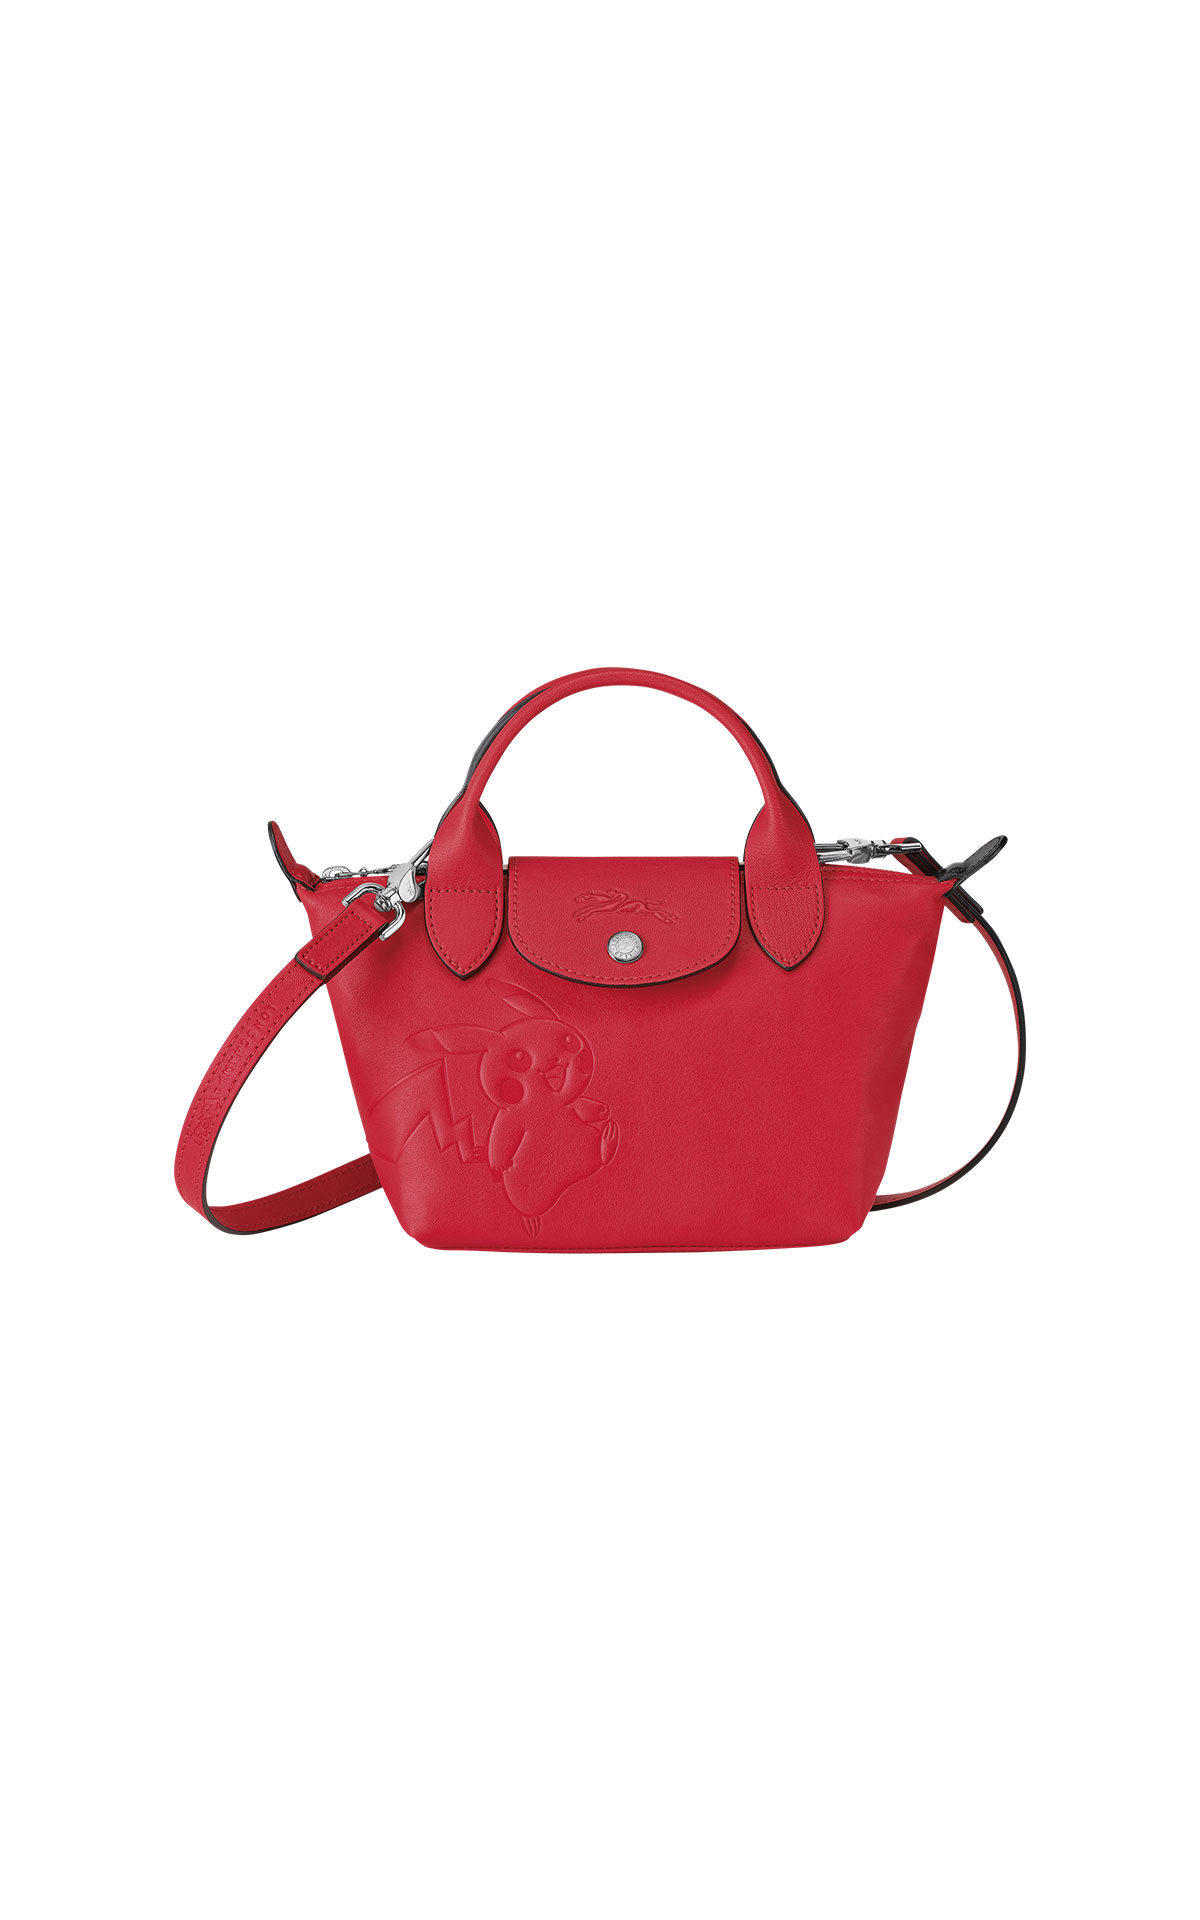 Longchamp Le pliage cuir pokemon top handle bag with detachable strap from Bicester Village